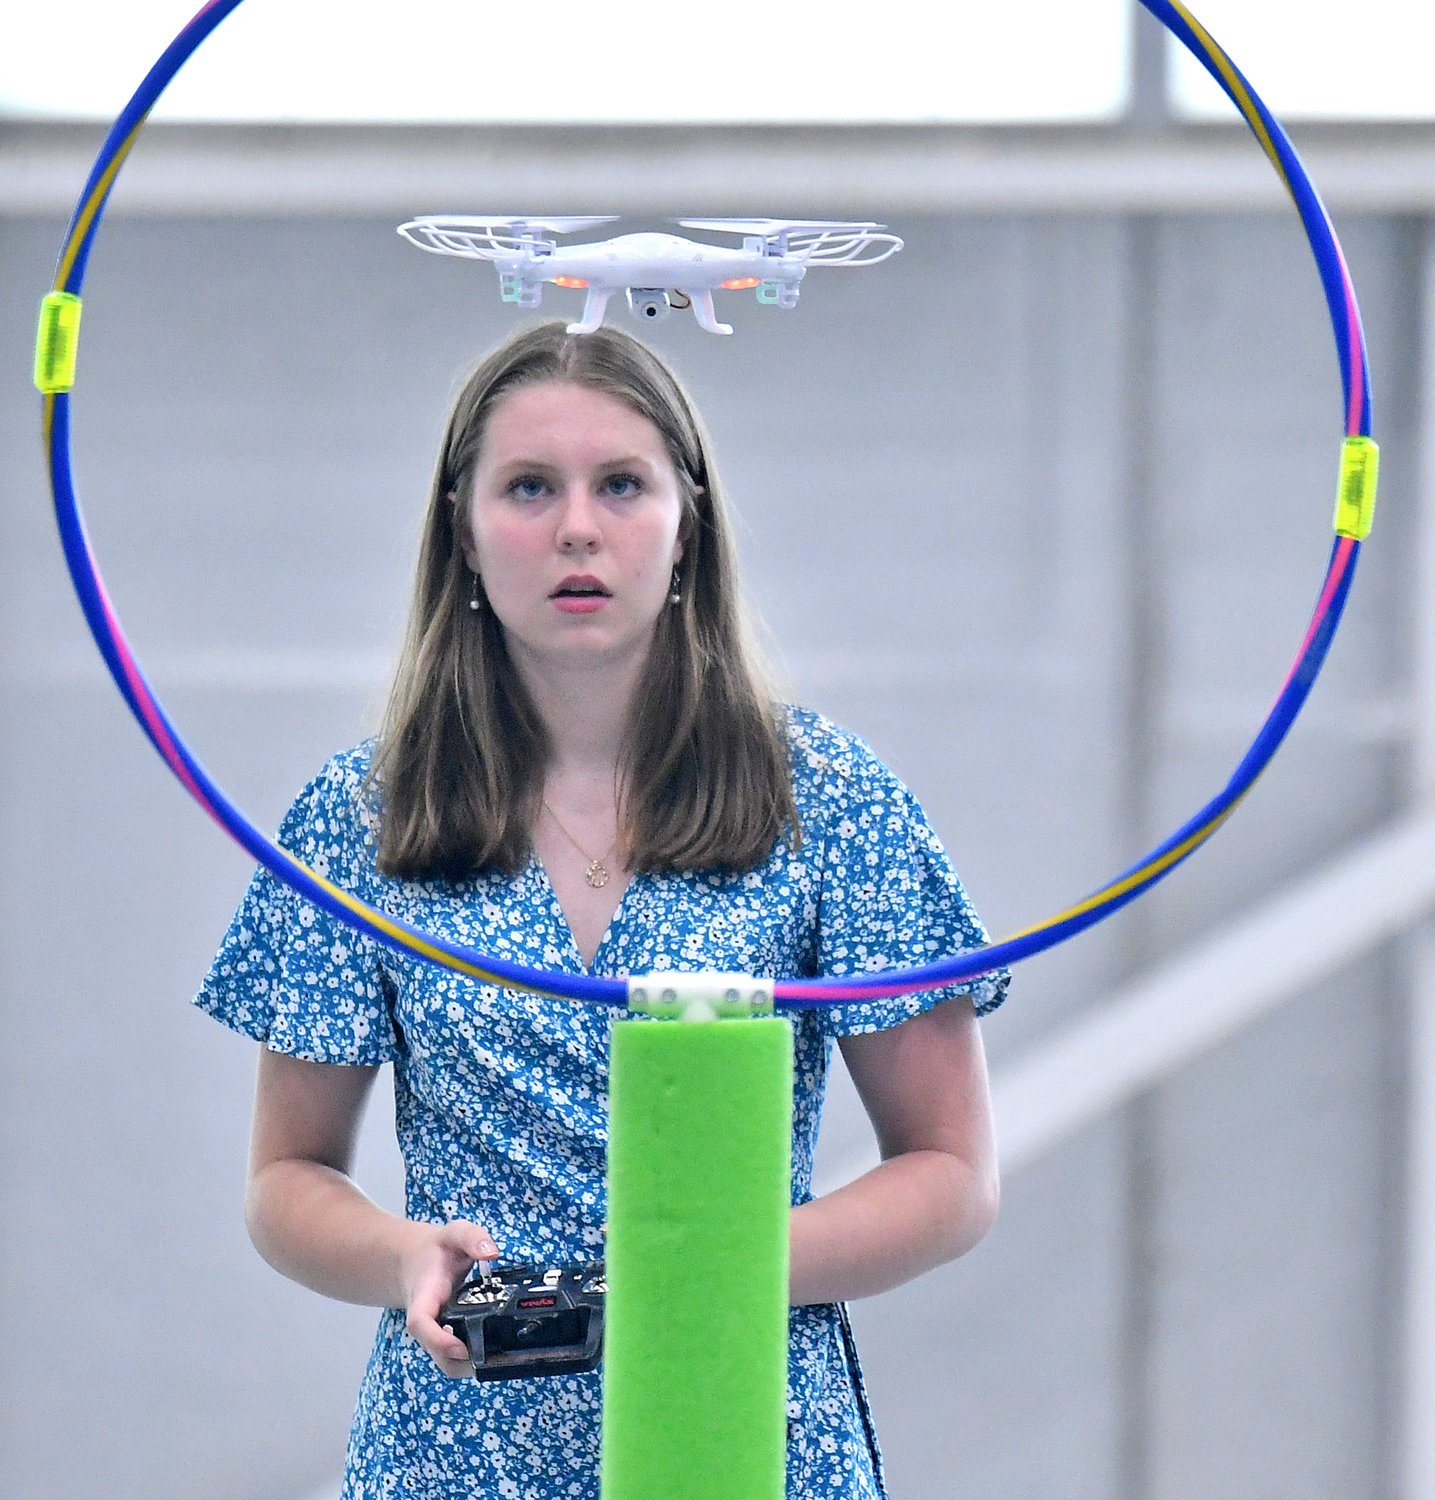 HOVERING — Rome Free Academy junior Teyla McVay pilots her drone into a circular  obstacle during Friday’s Directorate STEM Outreach Program’s Drone Camp challenge at the Innovare Advancement Center.